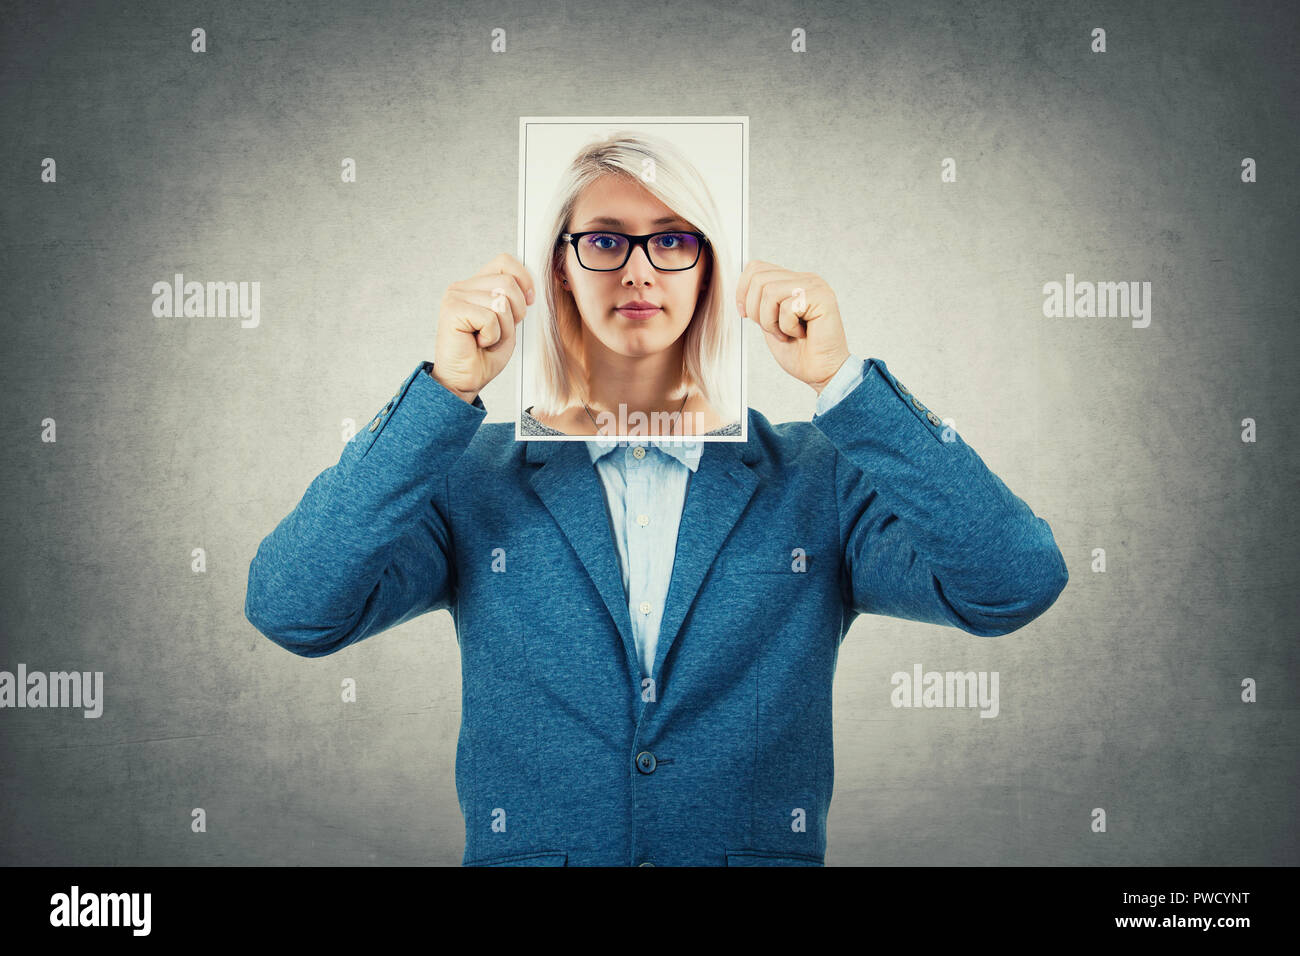 Businessman use a woman portrait as undercover, hiding his face behind photo sheet, like a fake mask. Private life, split personality and unreal ident Stock Photo